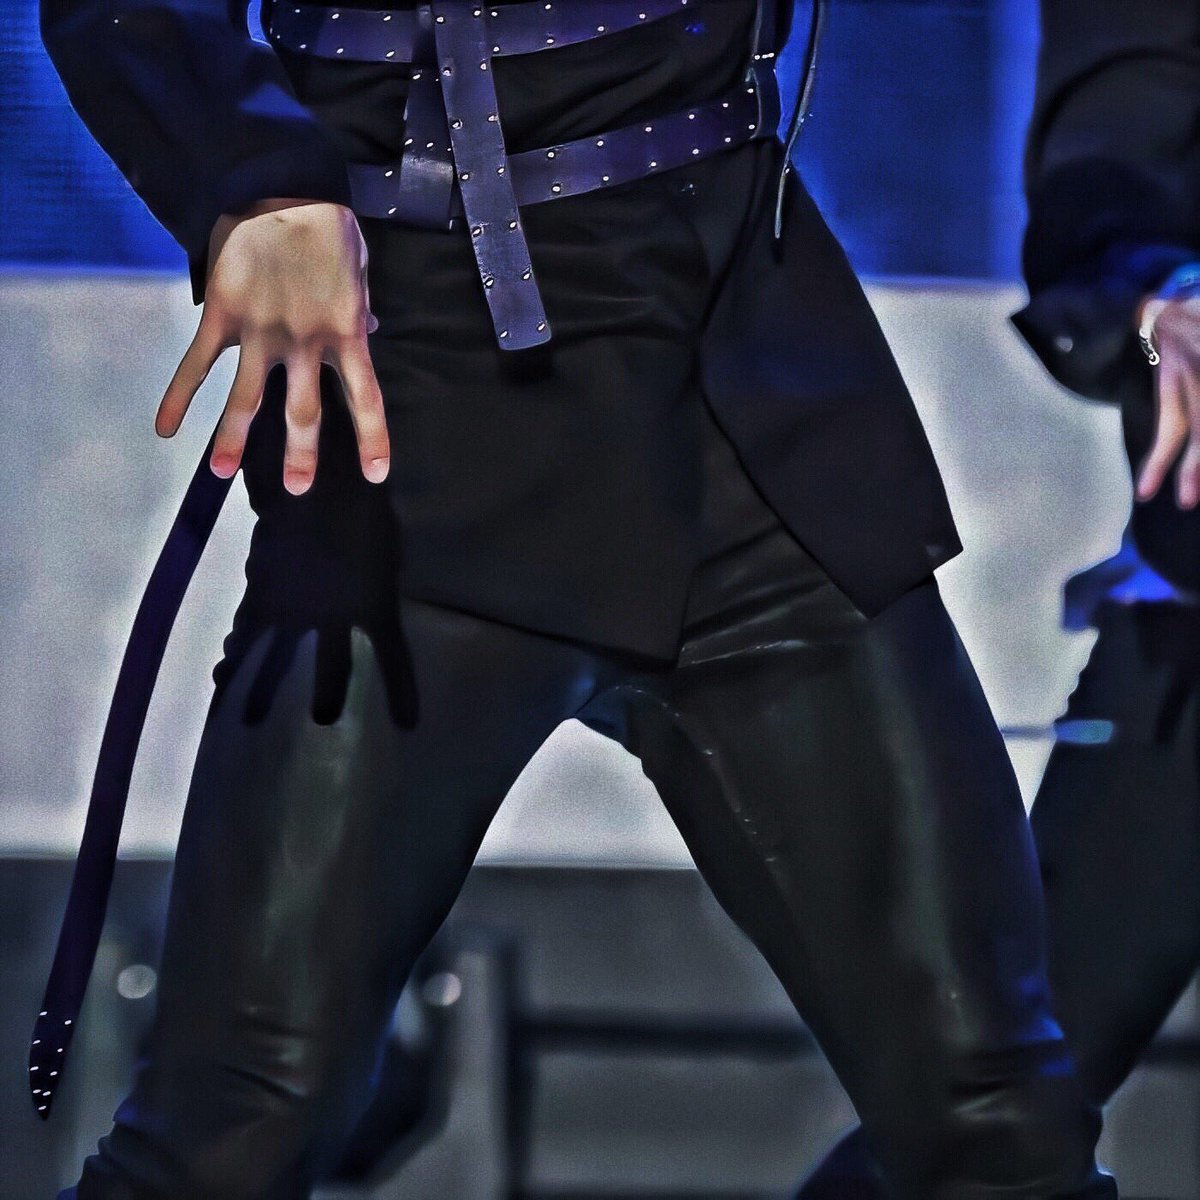 Jungkook in black pants - a thread because it’s something that i think about a lot